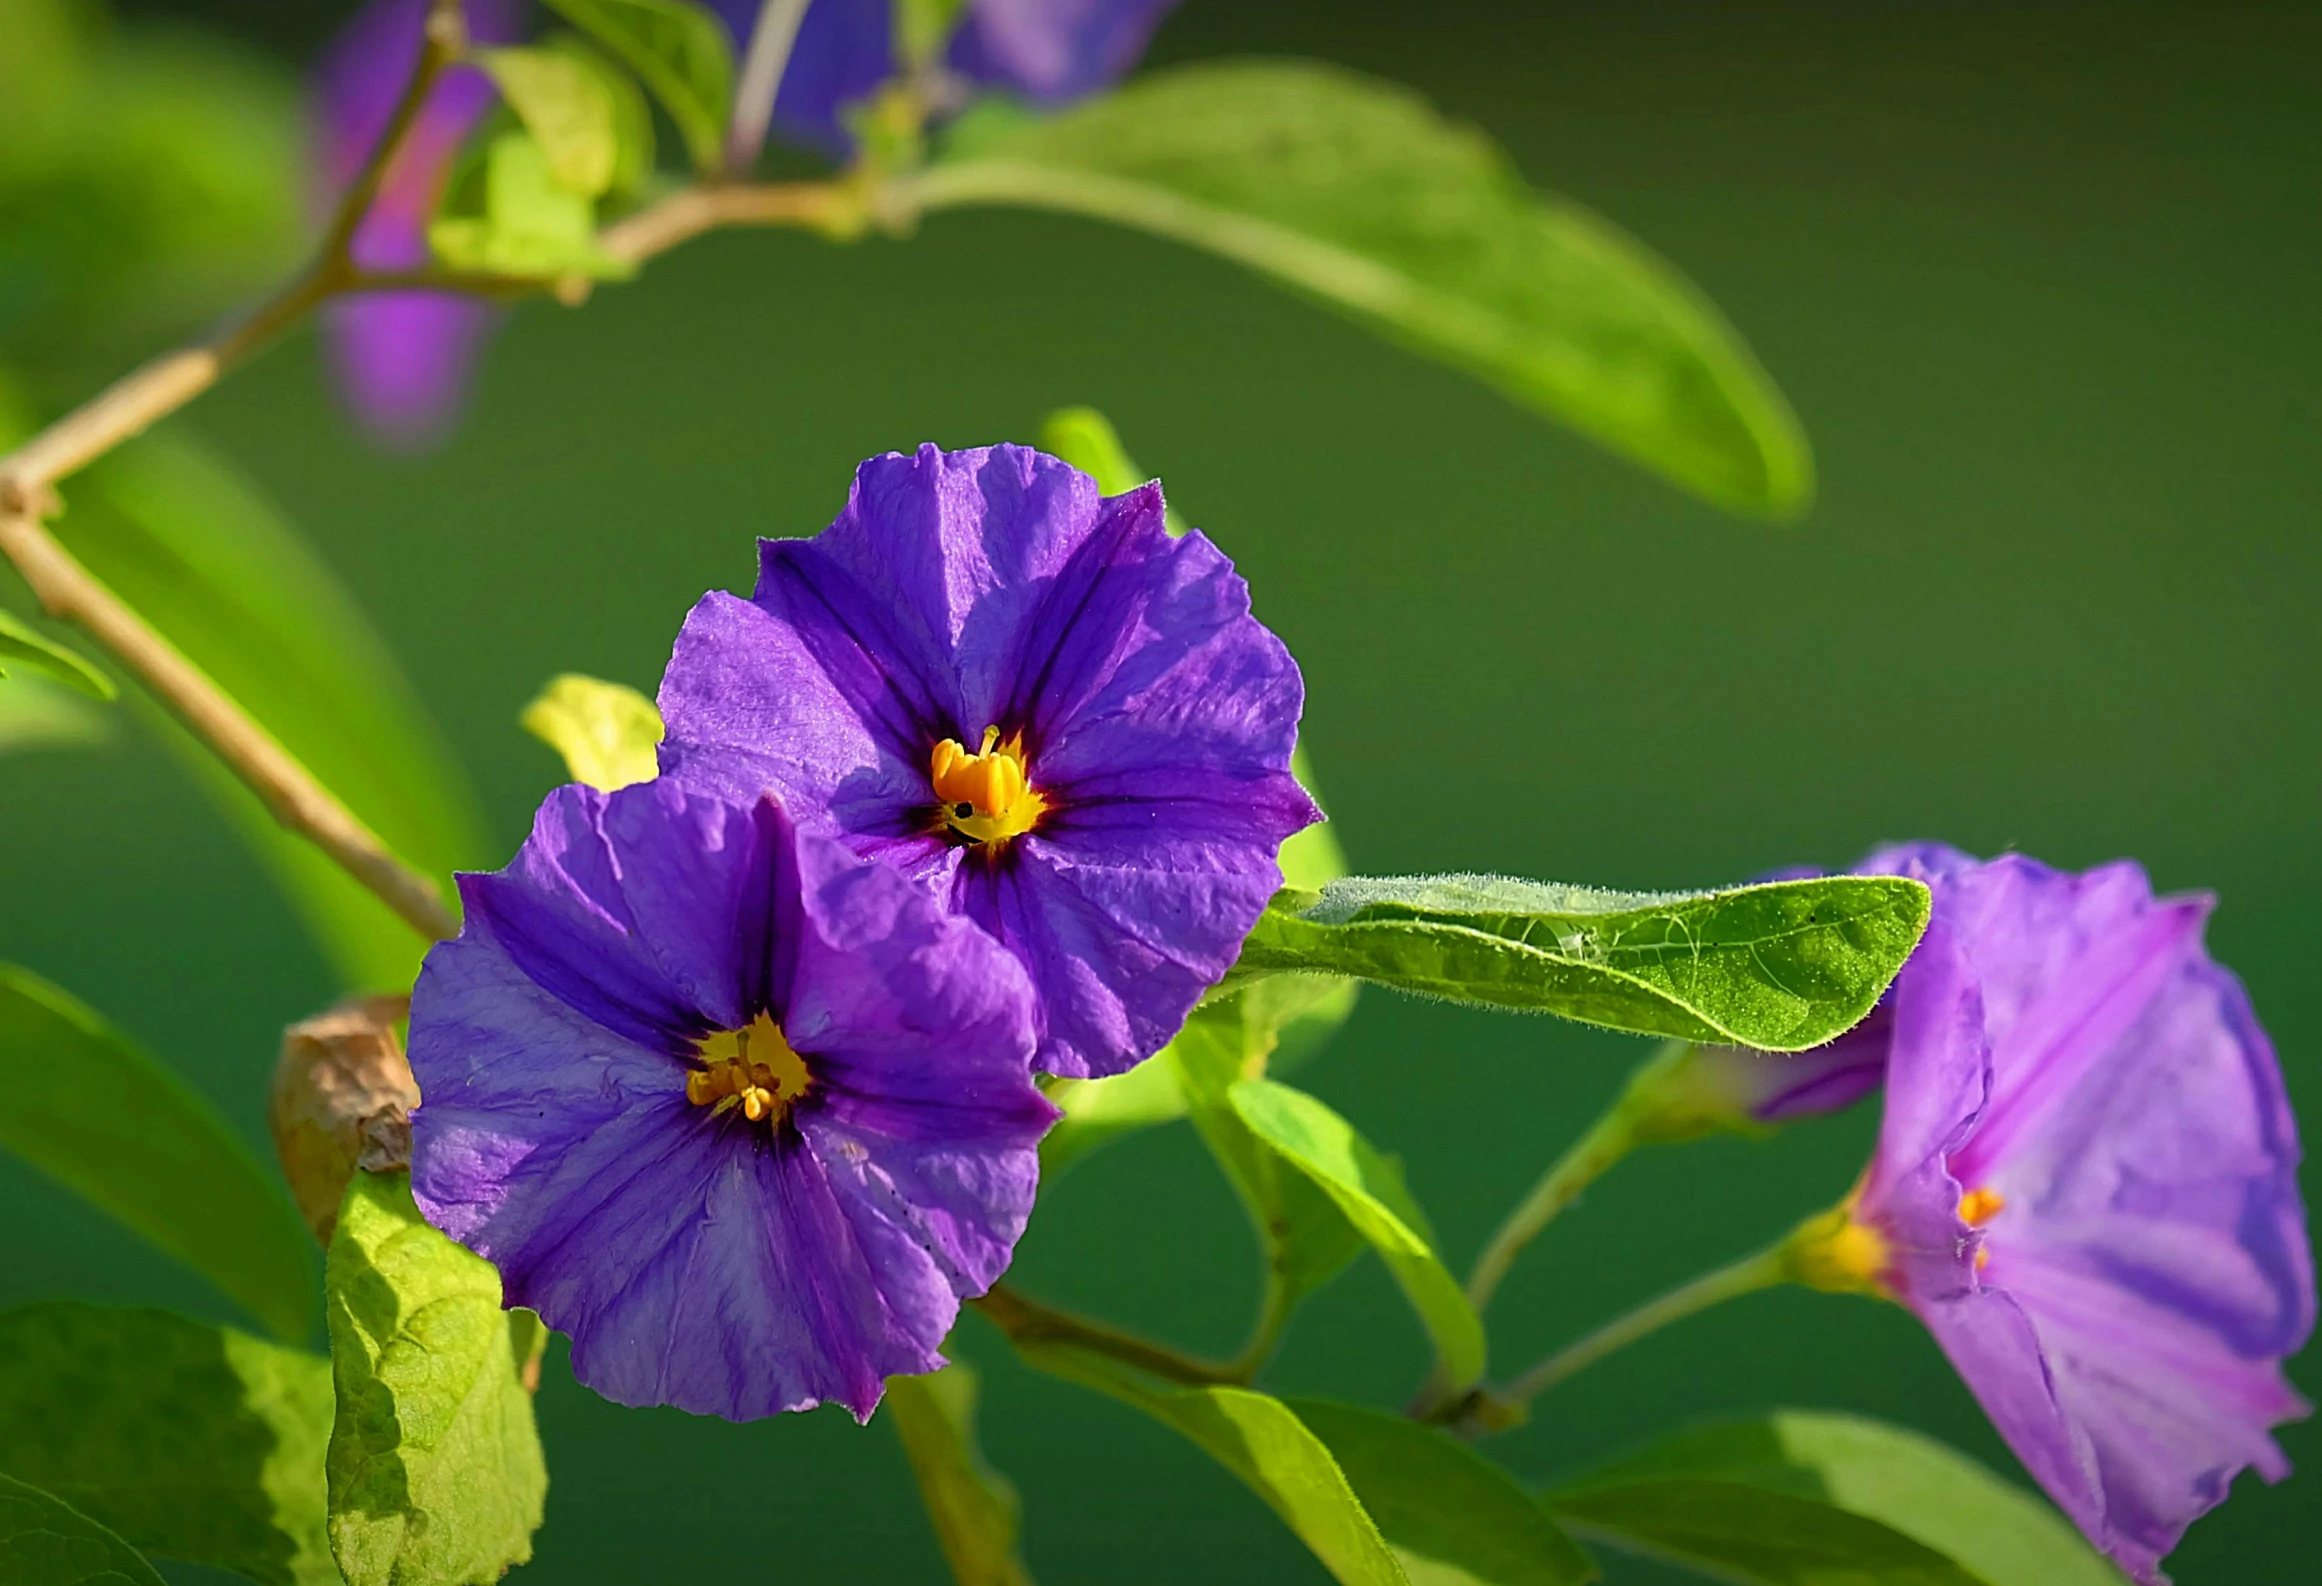 purple flowers bloom on a green nch with leaves